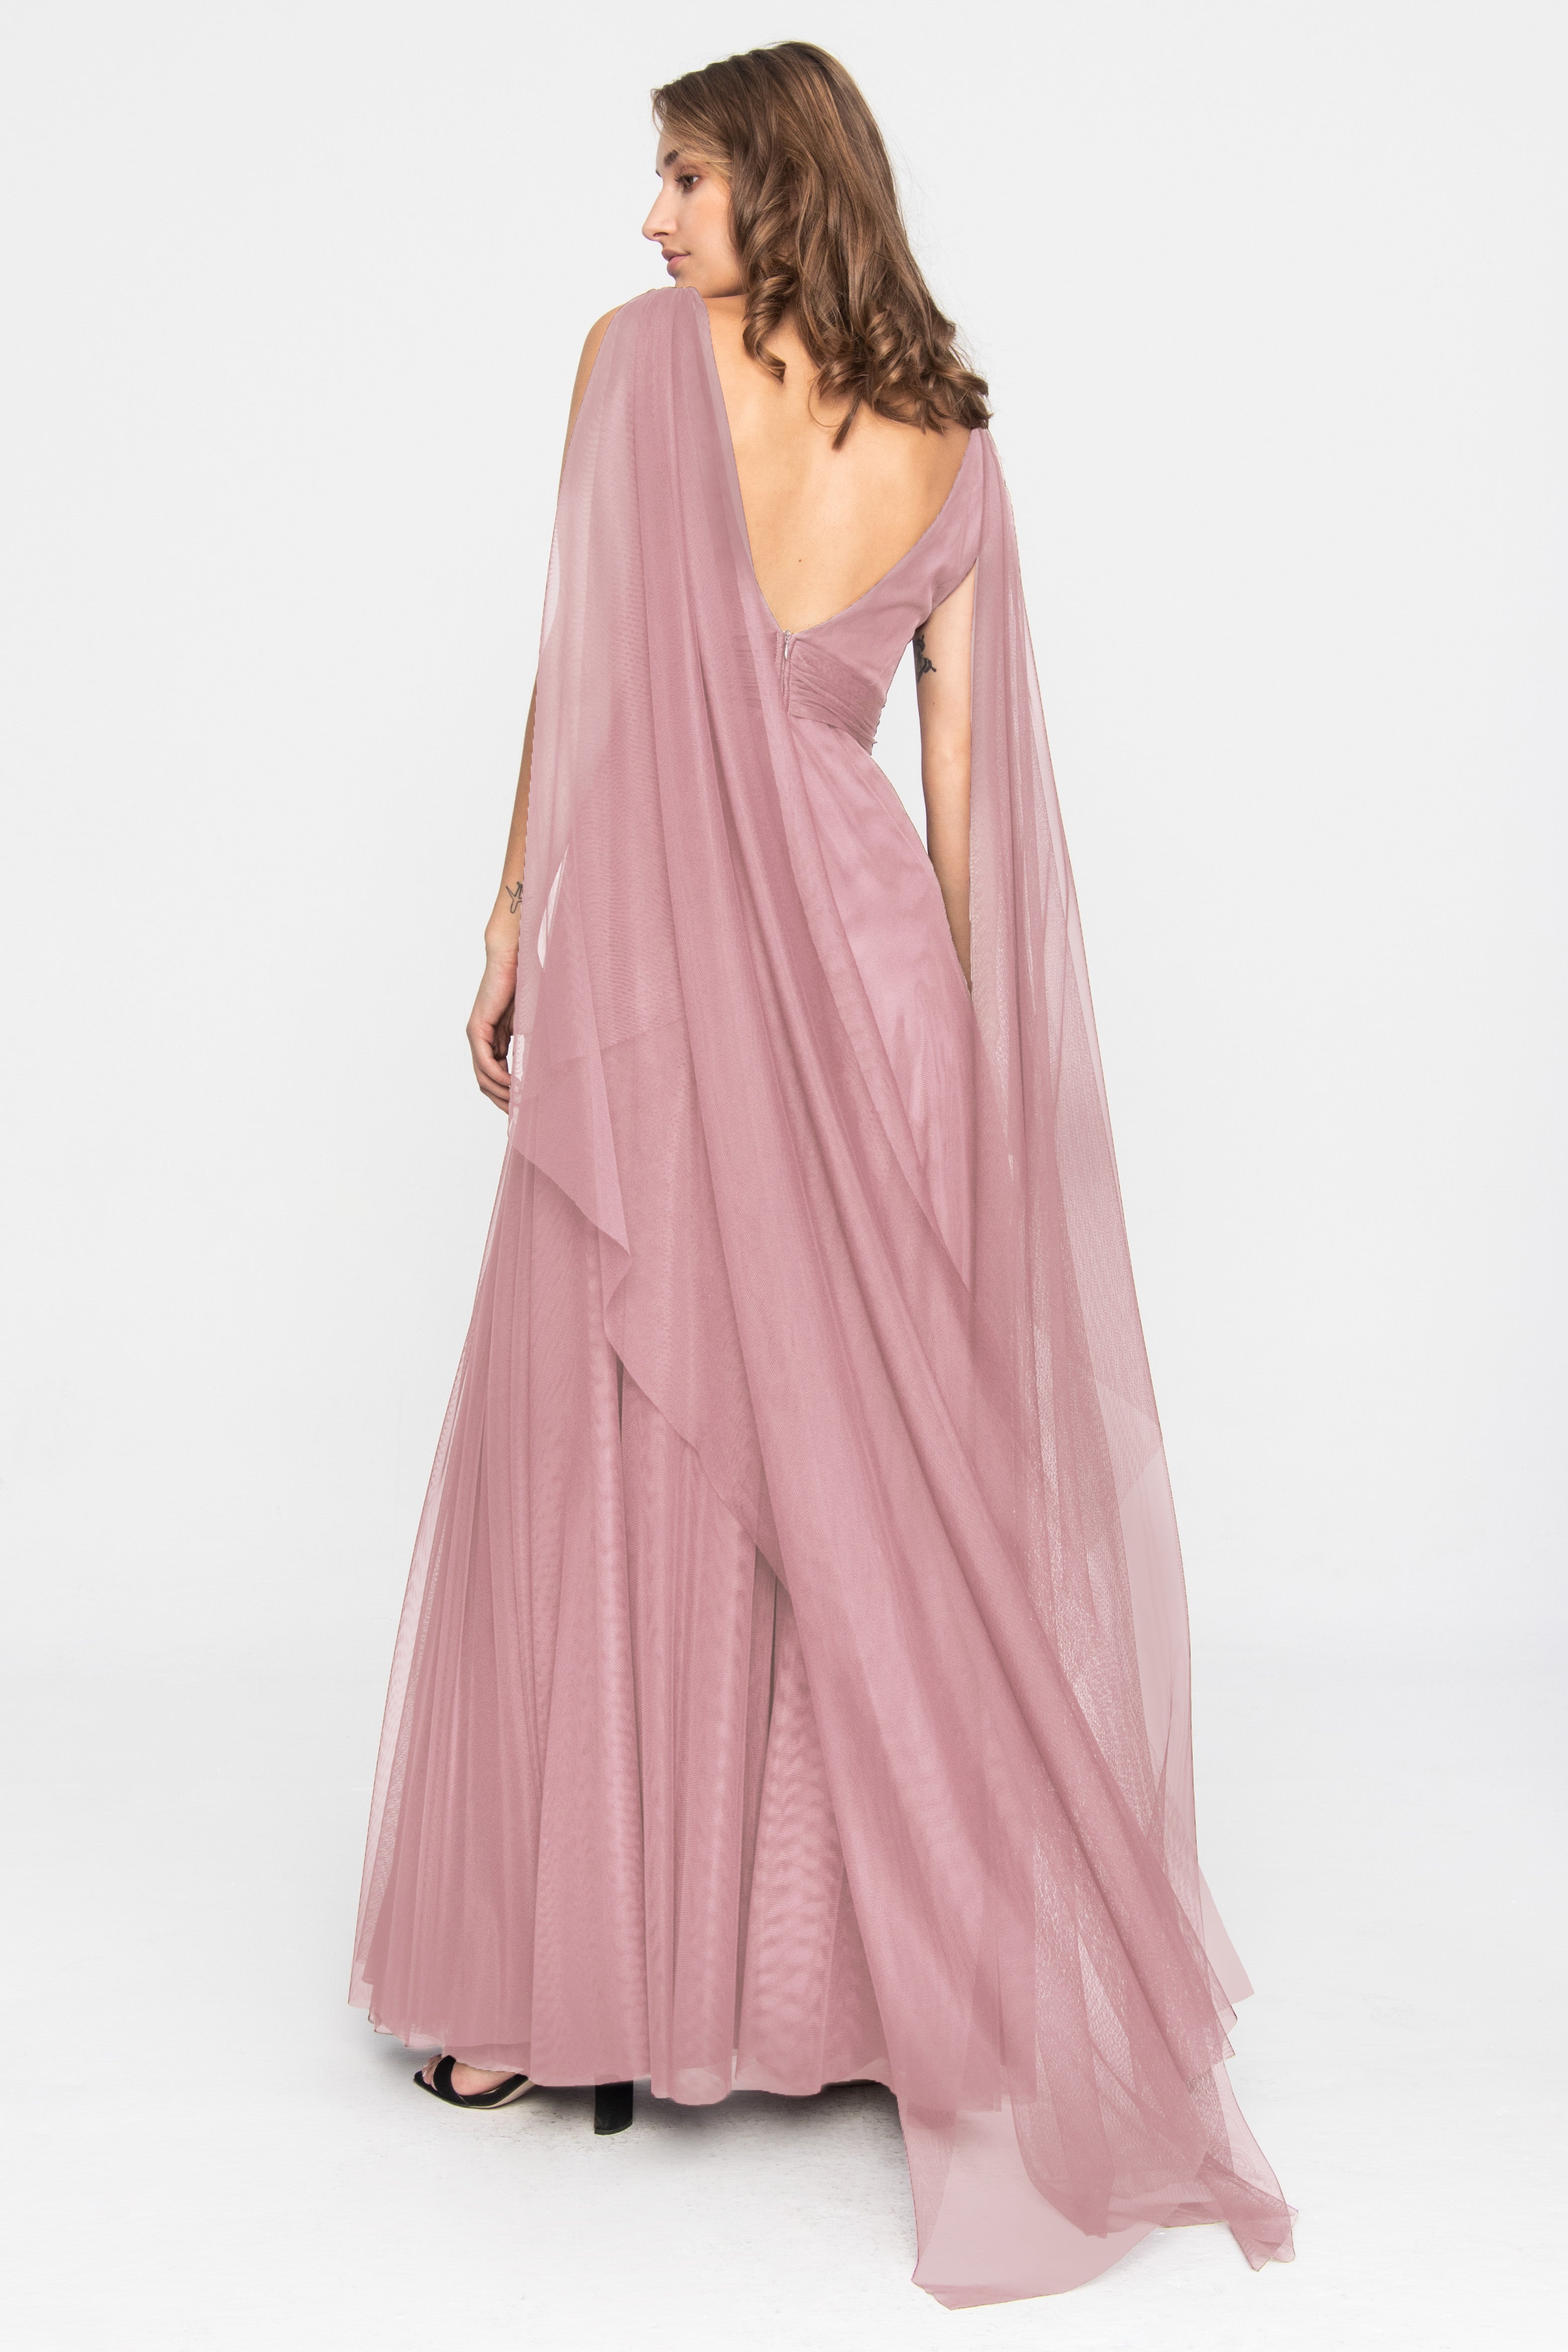 Tulle Terracotta Evening Gown Dusty pink